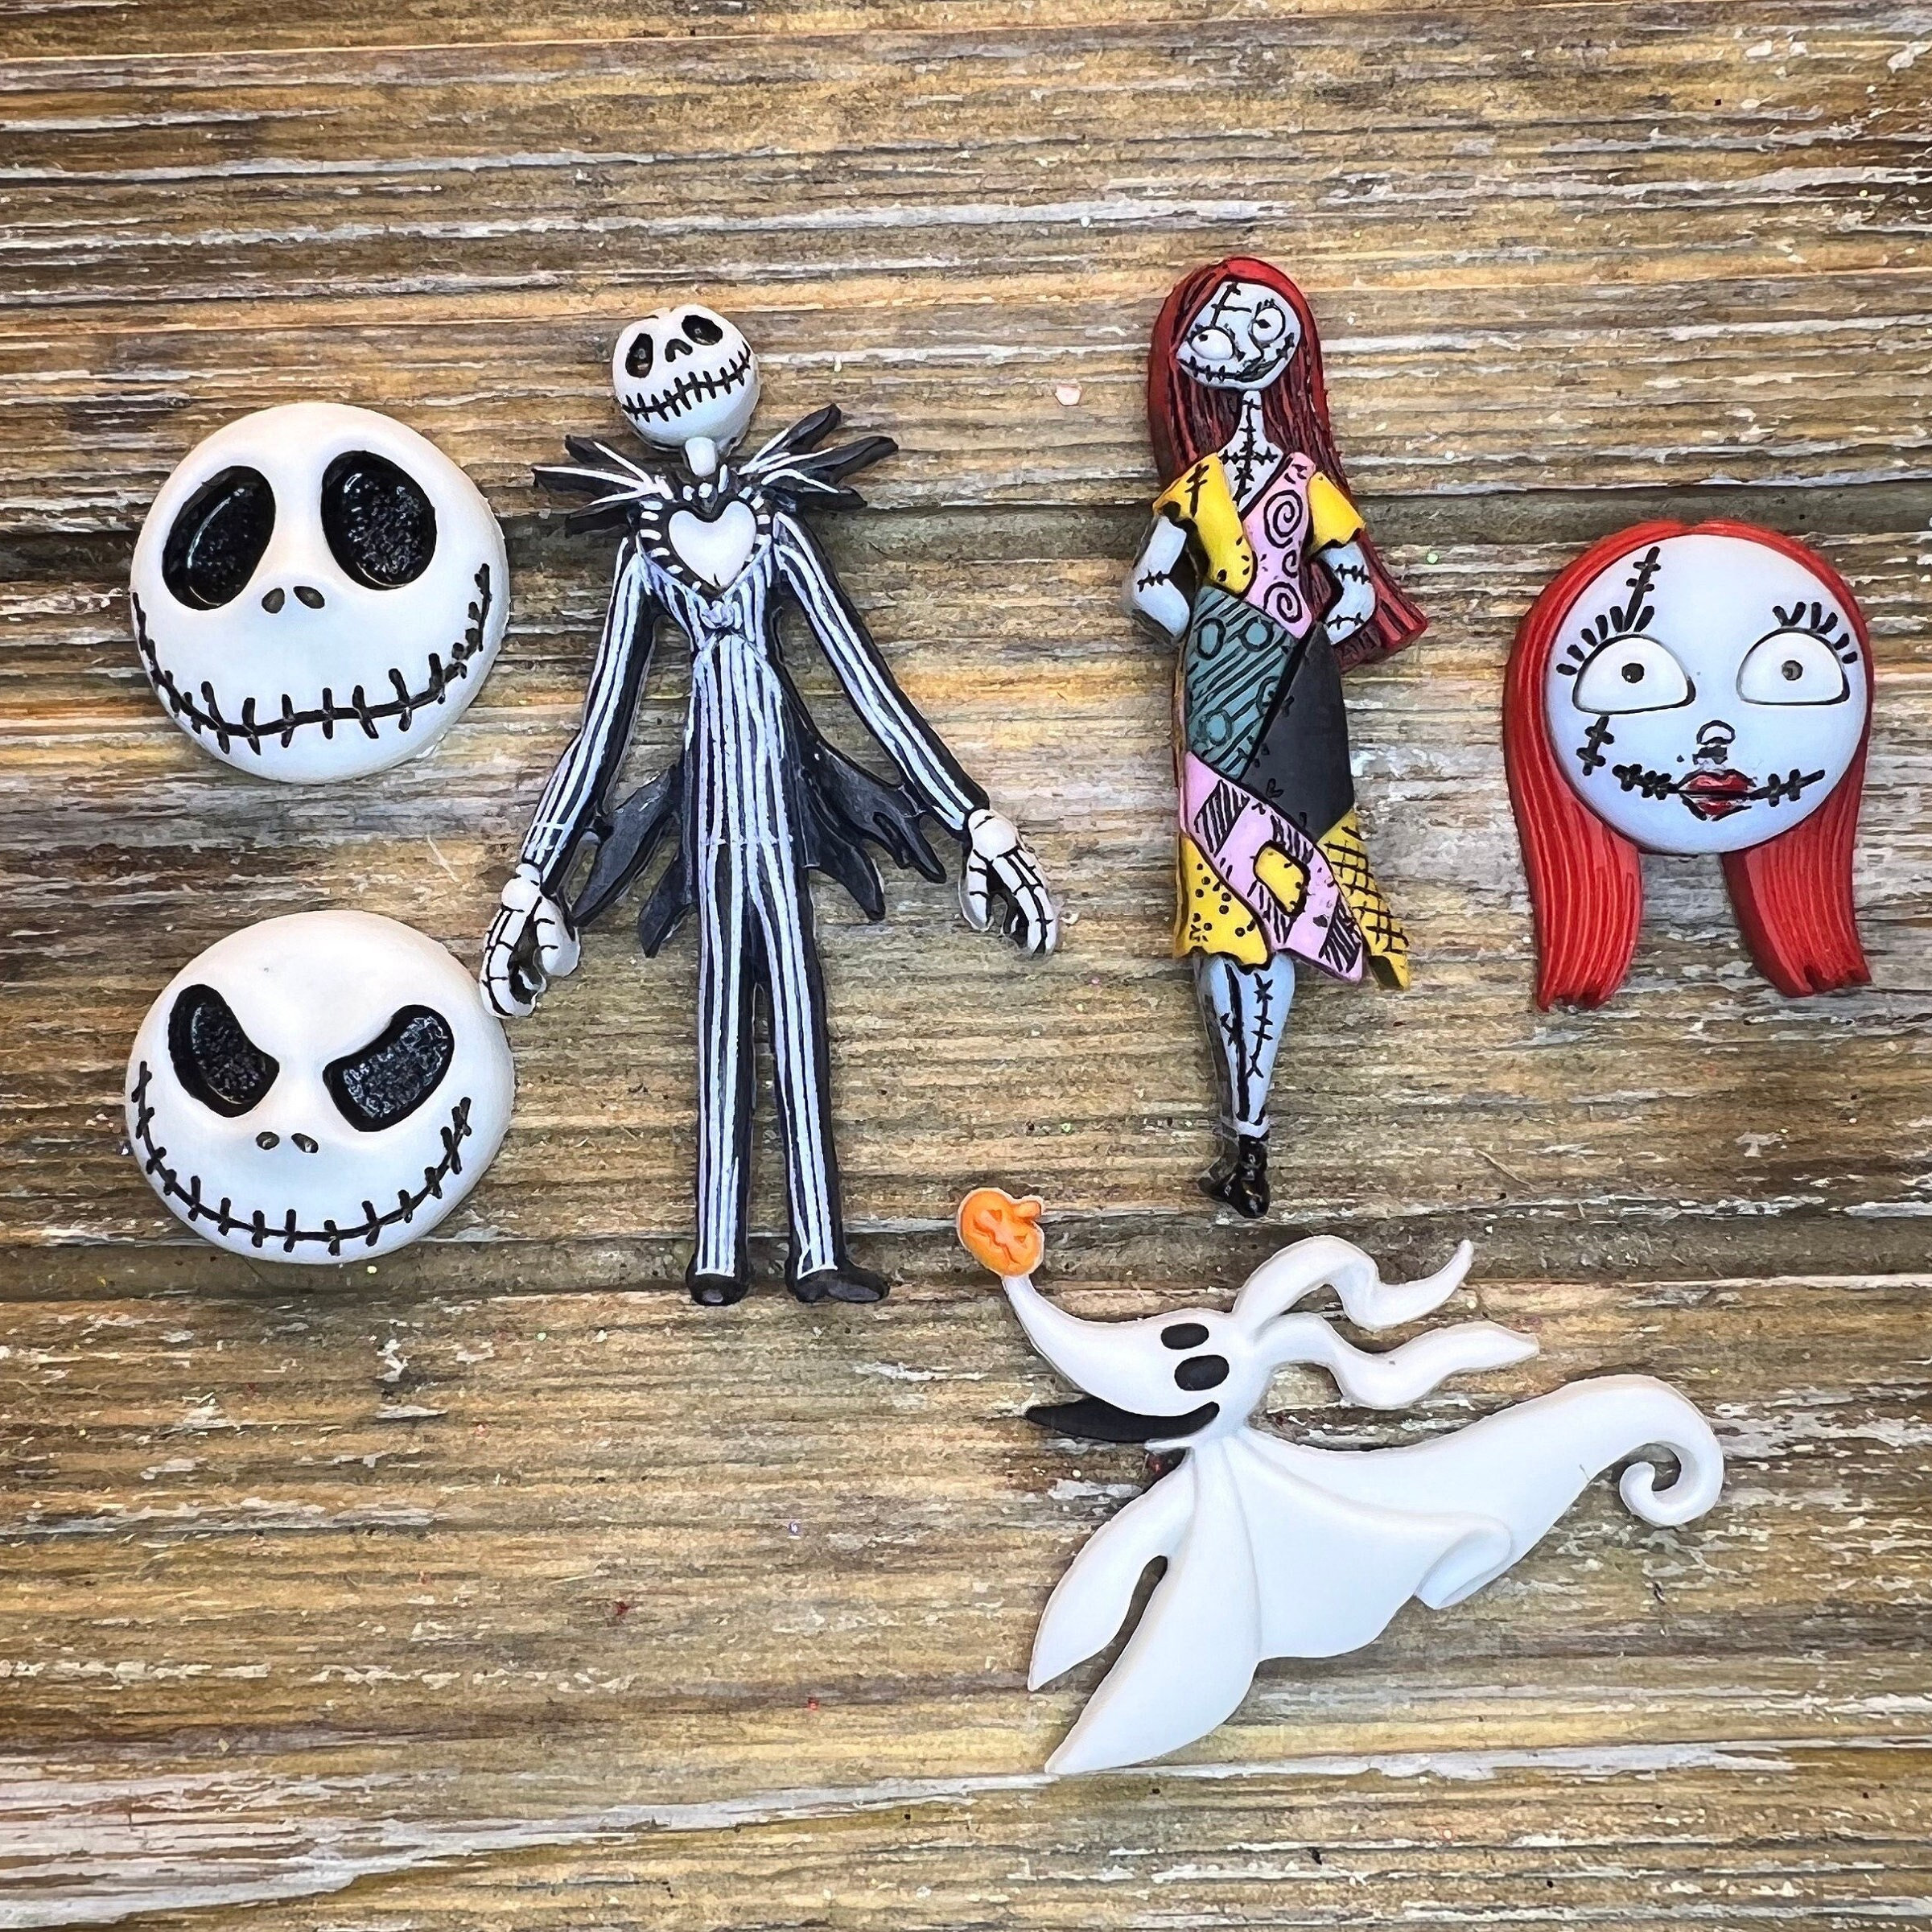 My new Nightmare Before Christmas Croc charms! :D : r